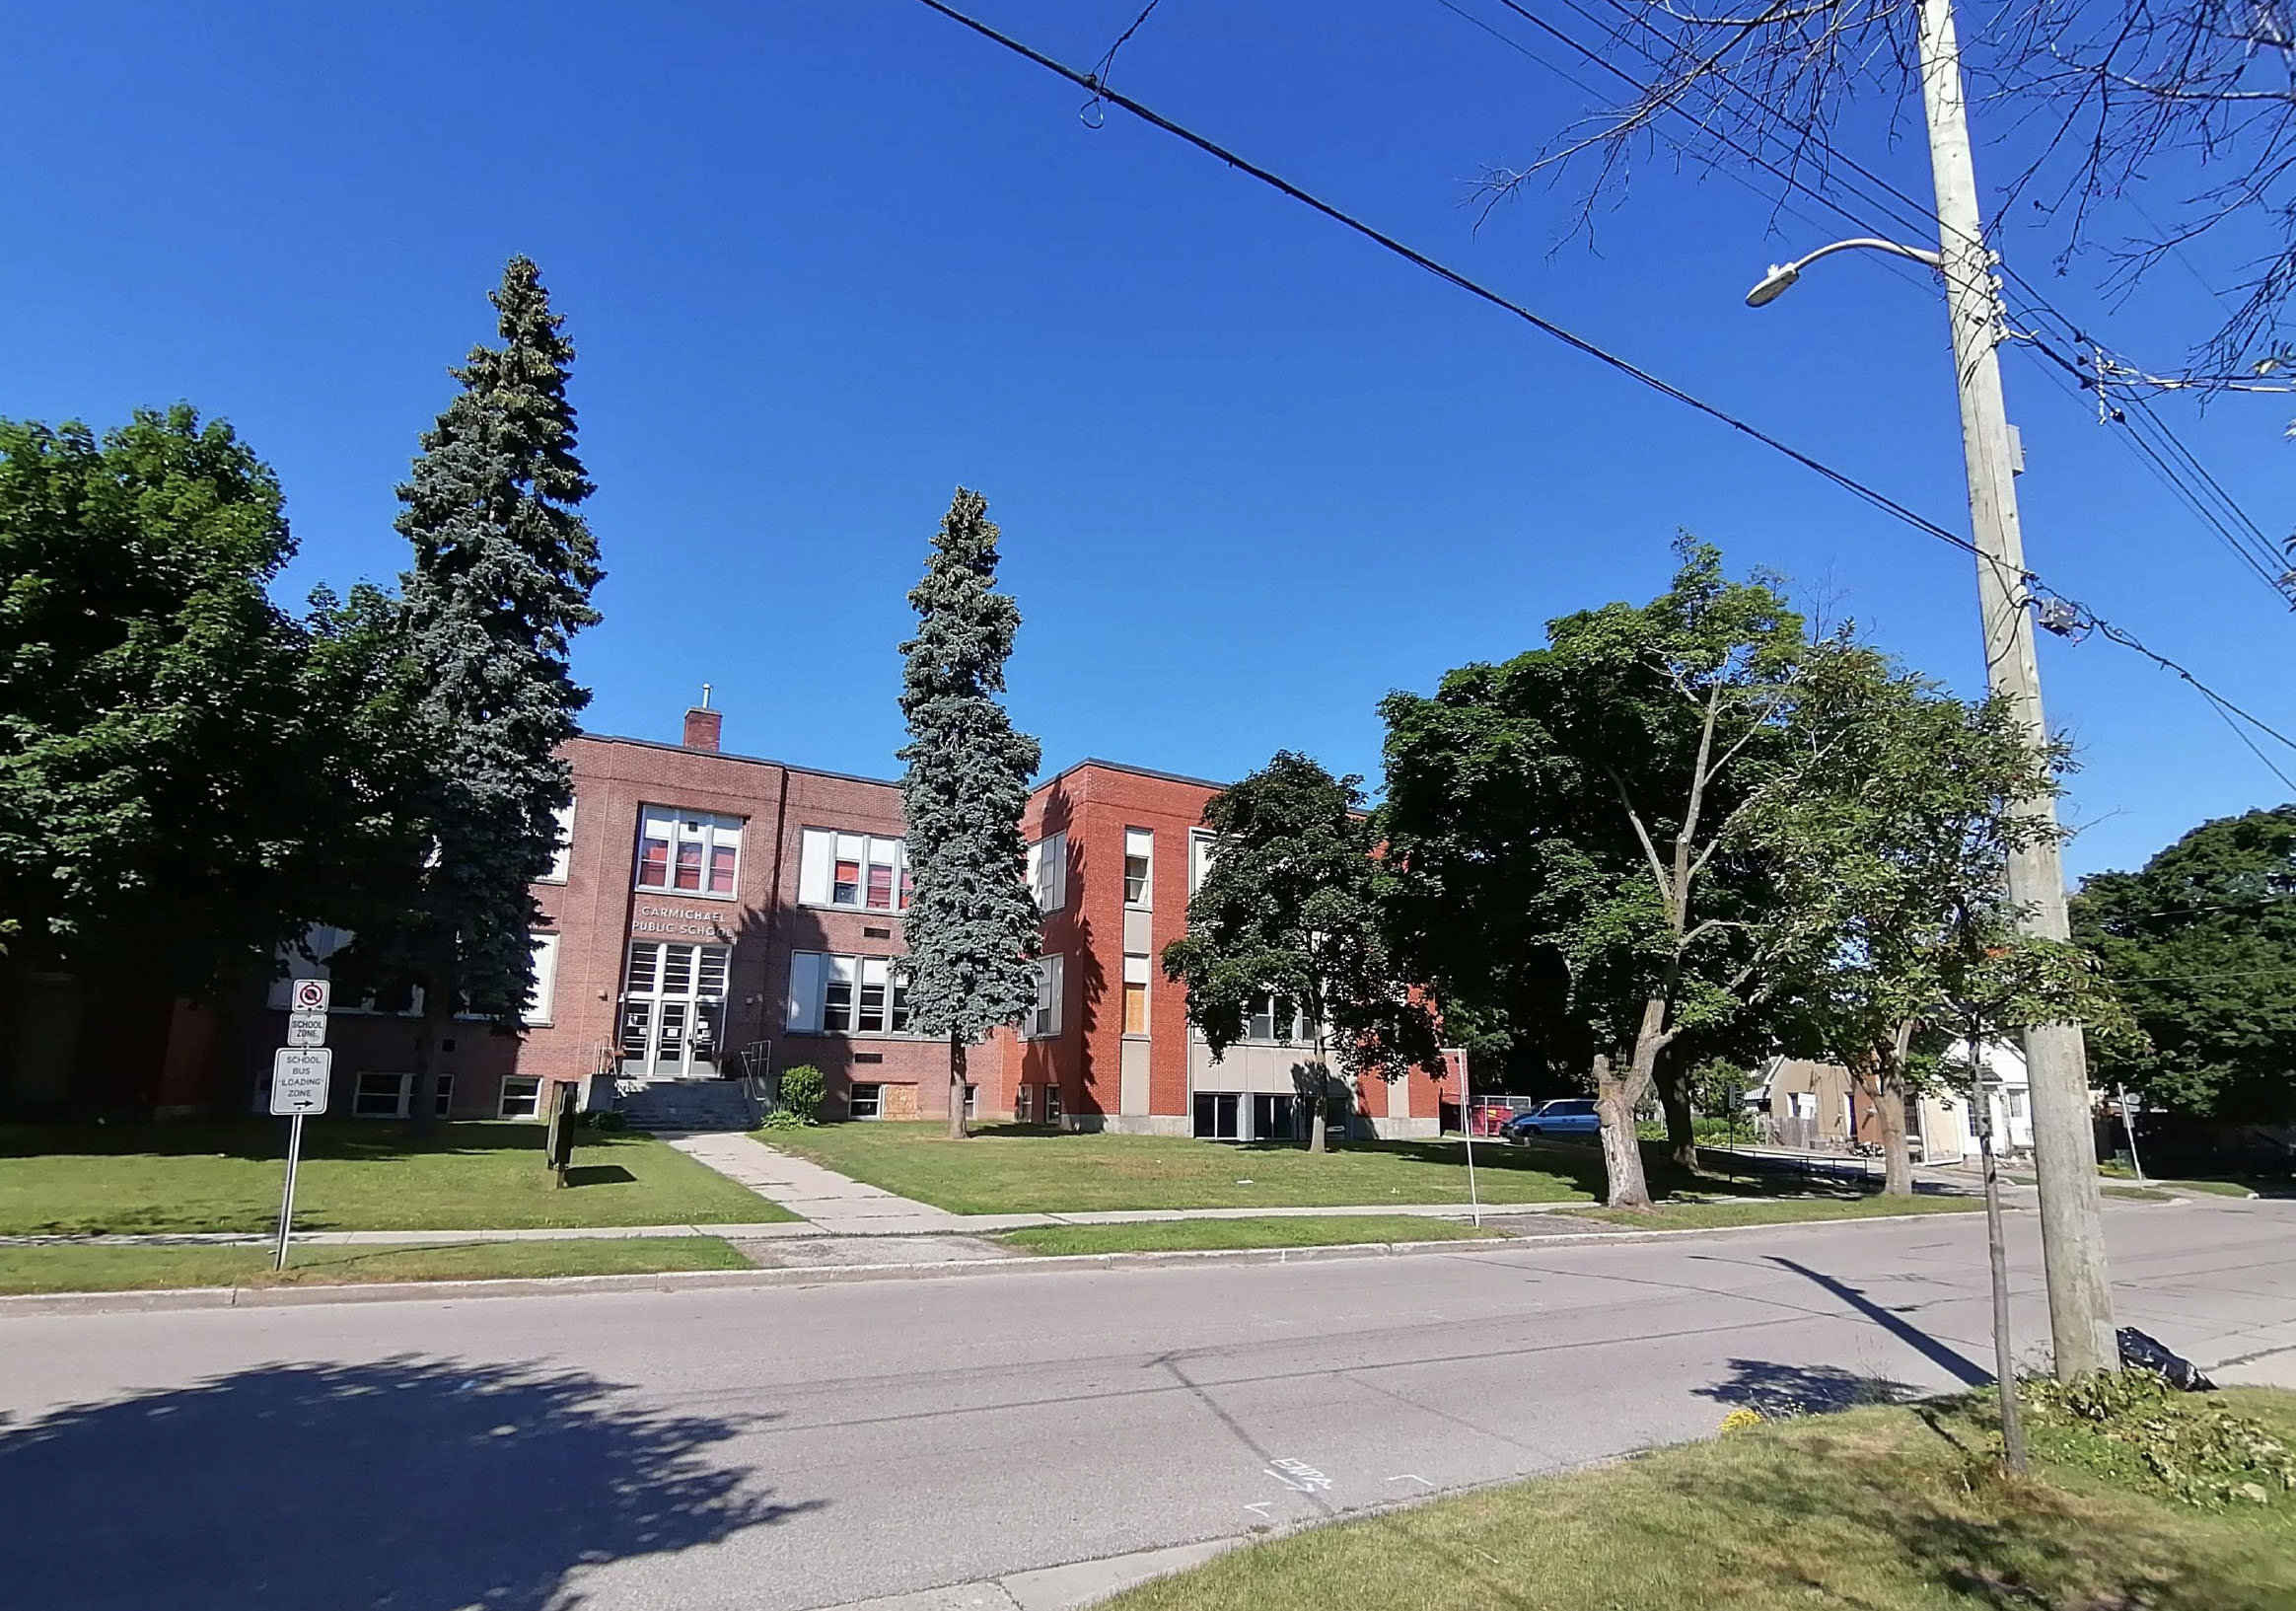 AQMesh network will be installed for monitoring around Canadian schools